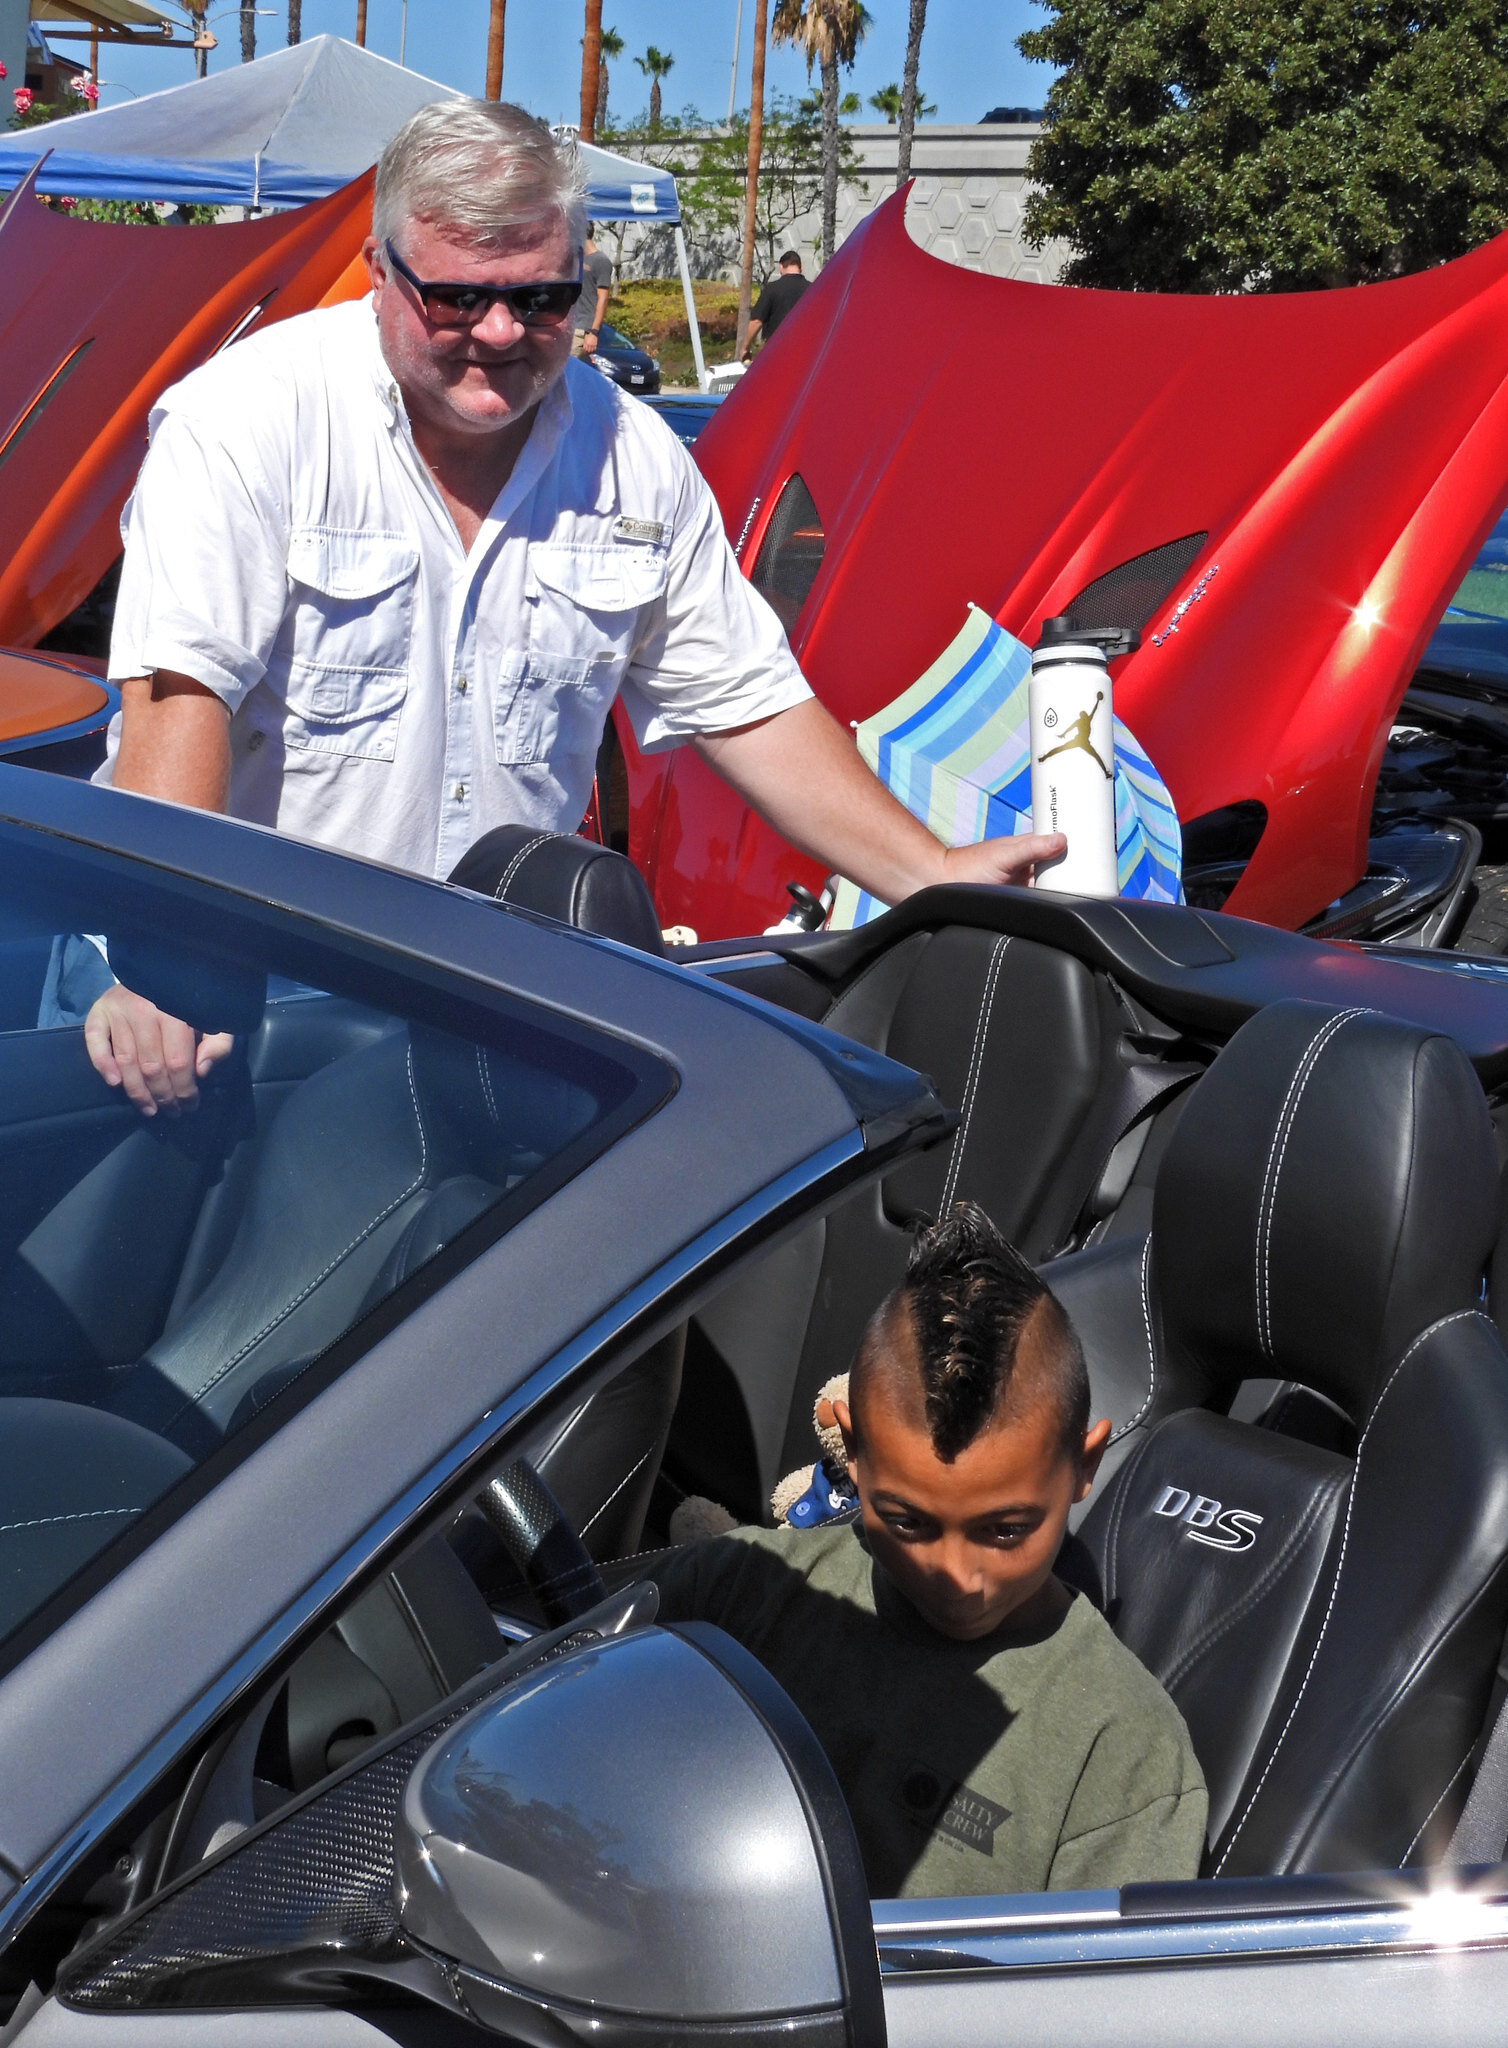 2022 09 British Car Day Keith R with DBS guest_1249